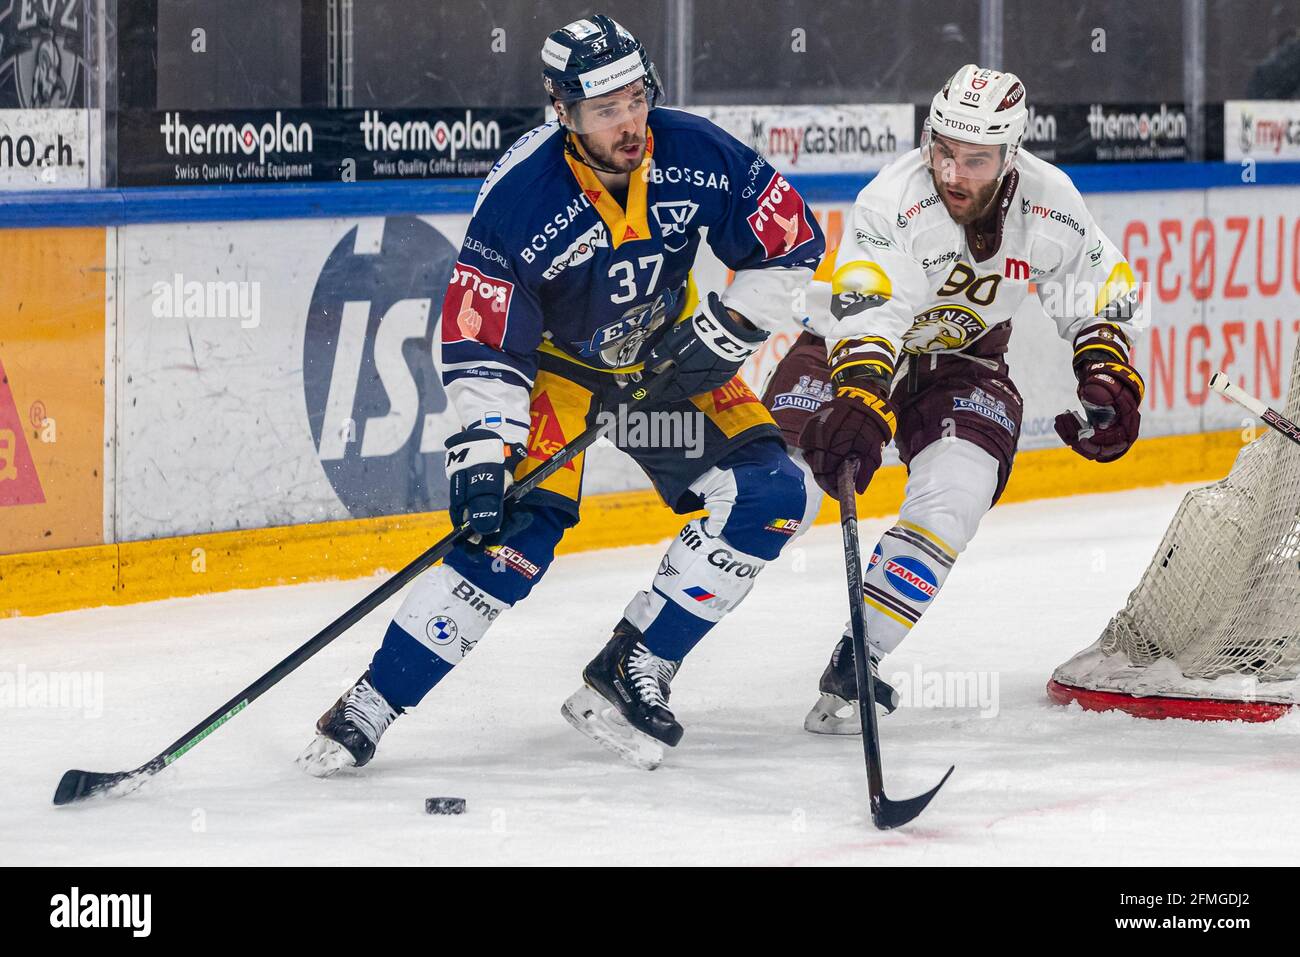 # 90 Simon Le Coultre (Geneva) follows Nick Shore # 37 (EV Zug) during the National League Playoff Final ice hockey game 3 between EV Zug and Geneve-Servette HC on May 7th, 2021 in the Bossard Arena in Zug. (Switzerland/Croatia OUT) Credit: SPP Sport Press Photo. /Alamy Live News Stock Photo